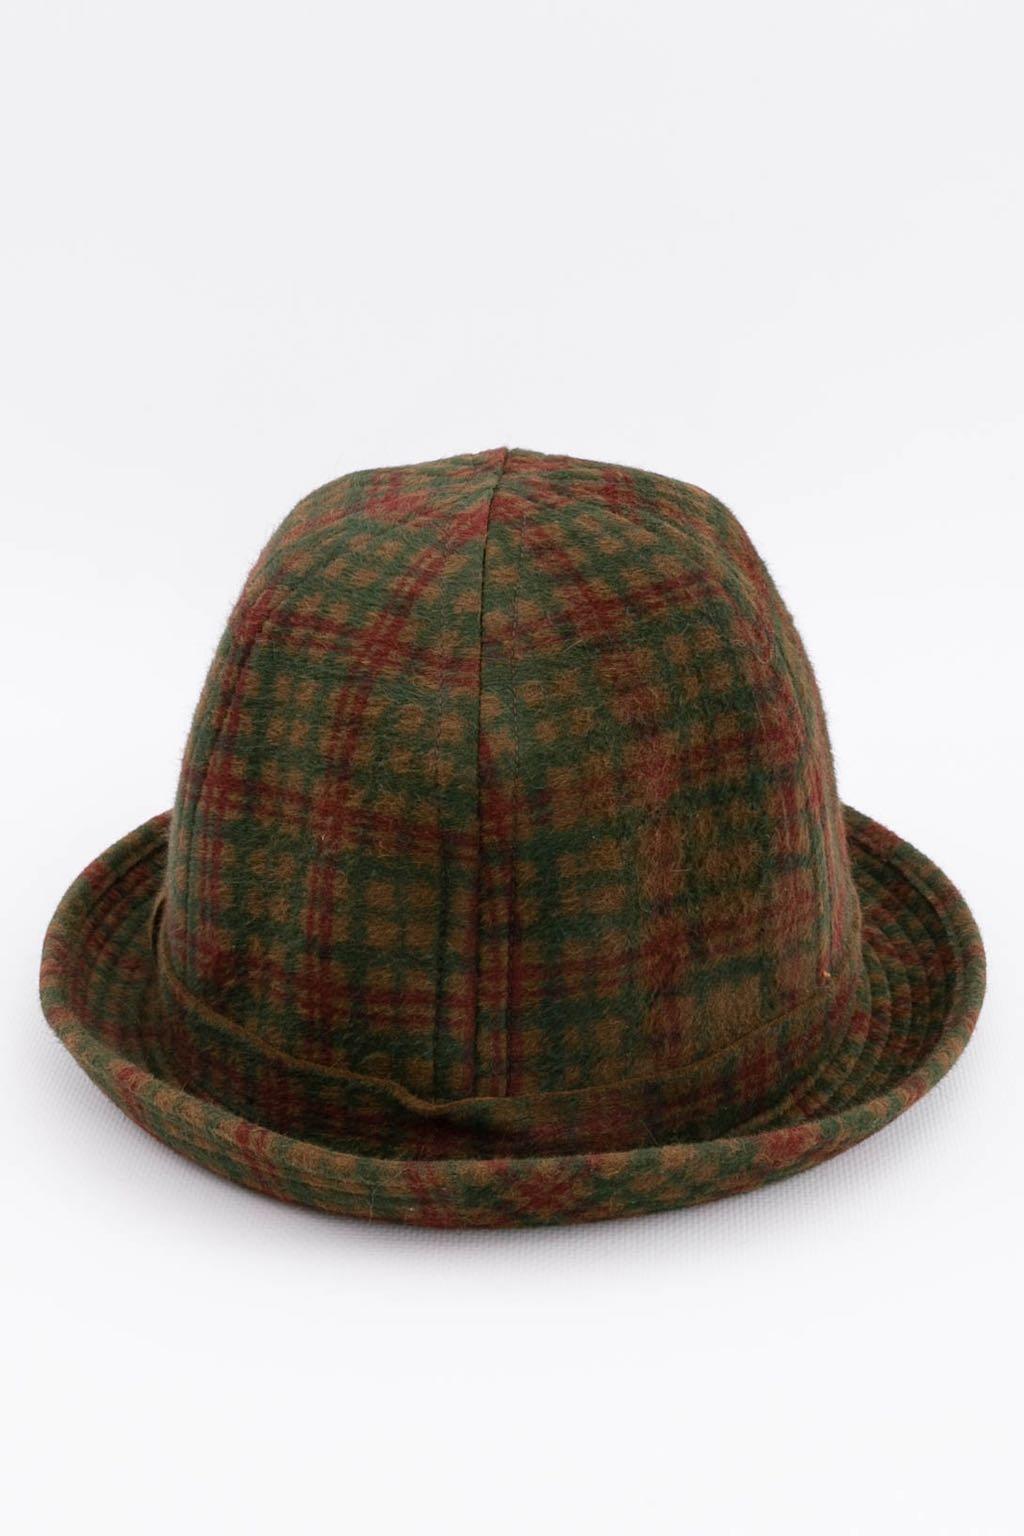 Black Motsch Khaki Green Hat with Red and Dark Green Grid Pattern For Sale